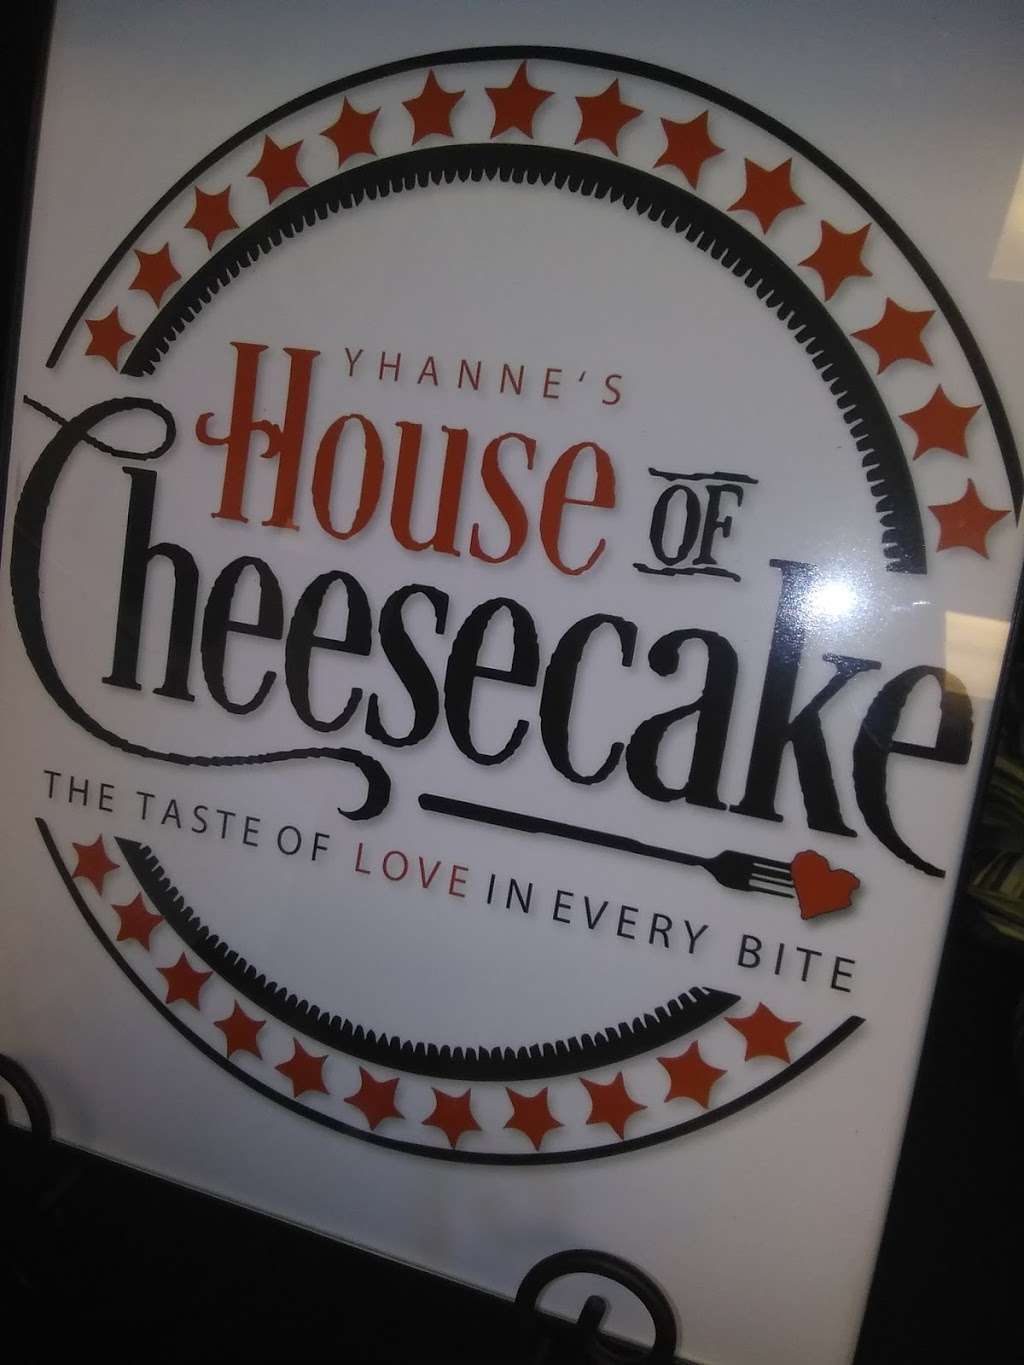 Yhannes House of Cheesecakes | 835 N Delsea Dr, Clayton, NJ 08312, USA | Phone: (856) 881-0403